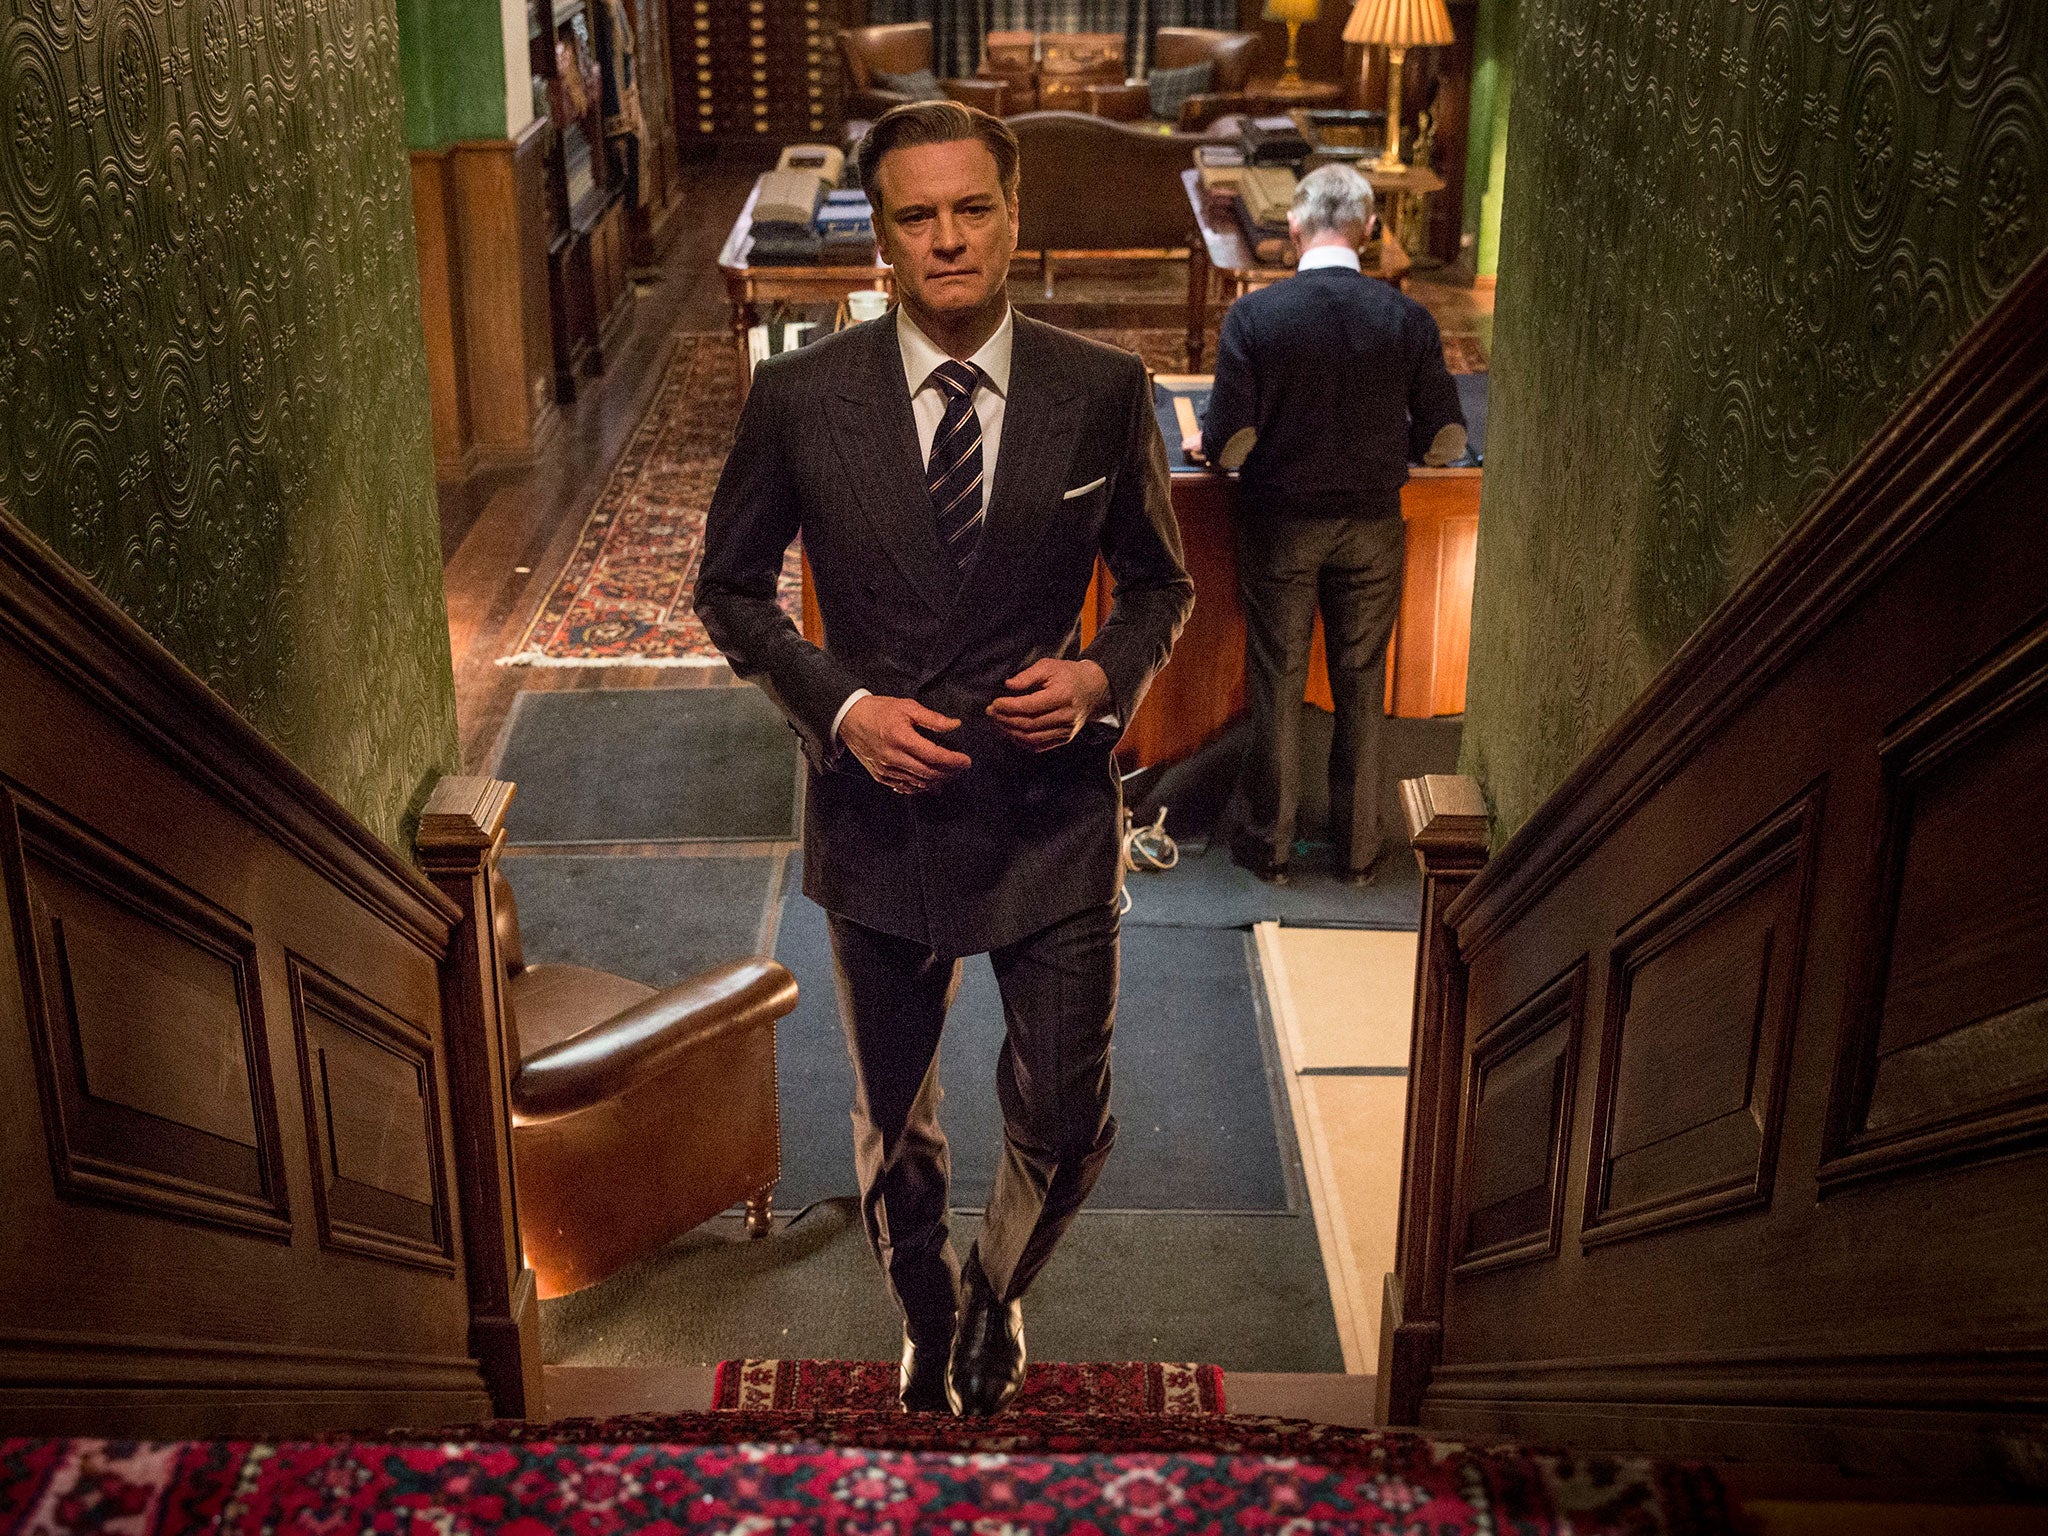 Colin Firth as Harry Hart in Kingsman: The Secret Service